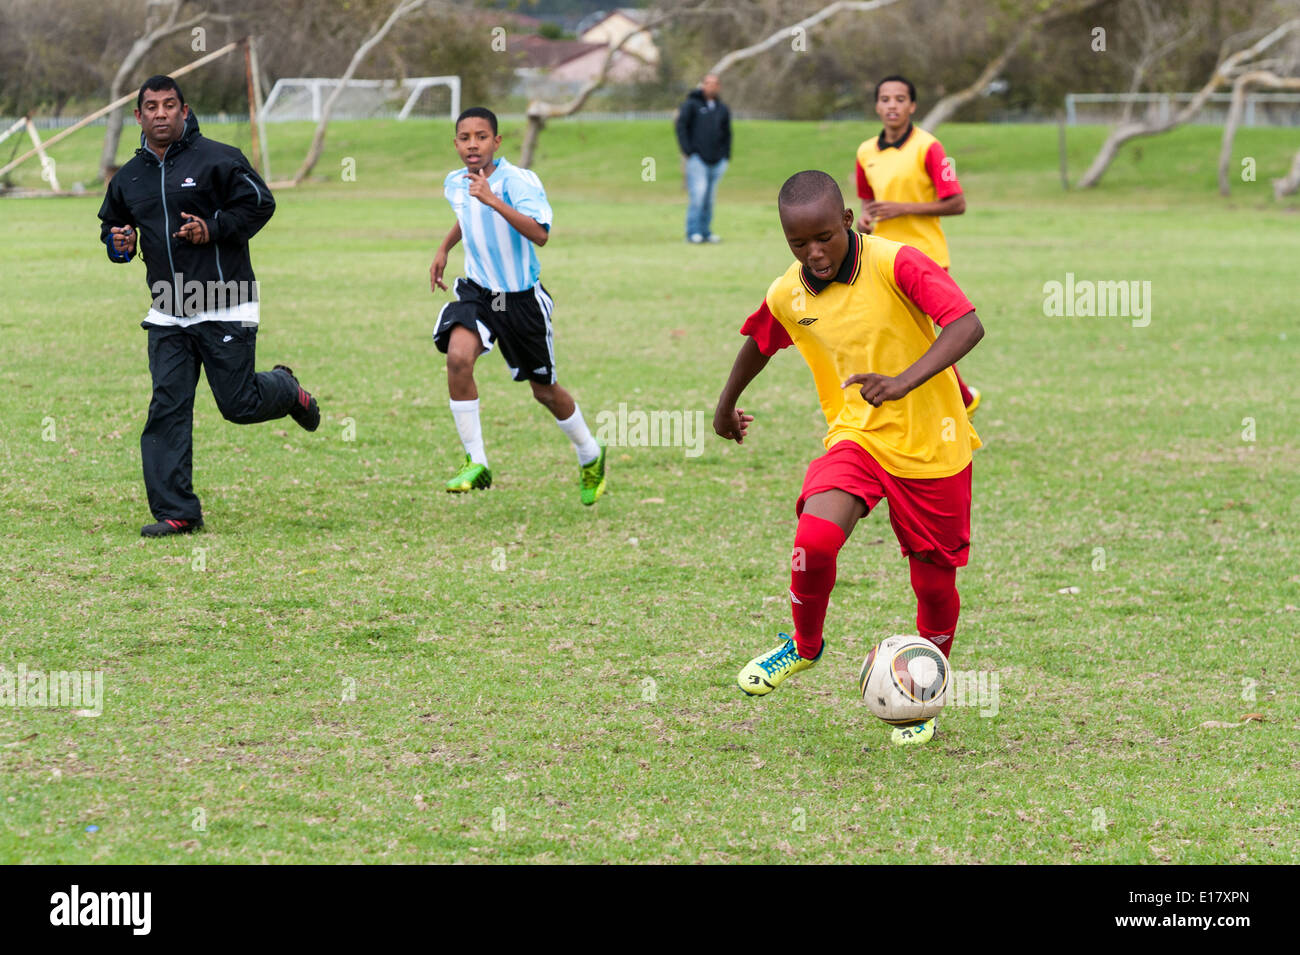 Football player running with the ball, referee watching, Cape Town, South Africa Stock Photo